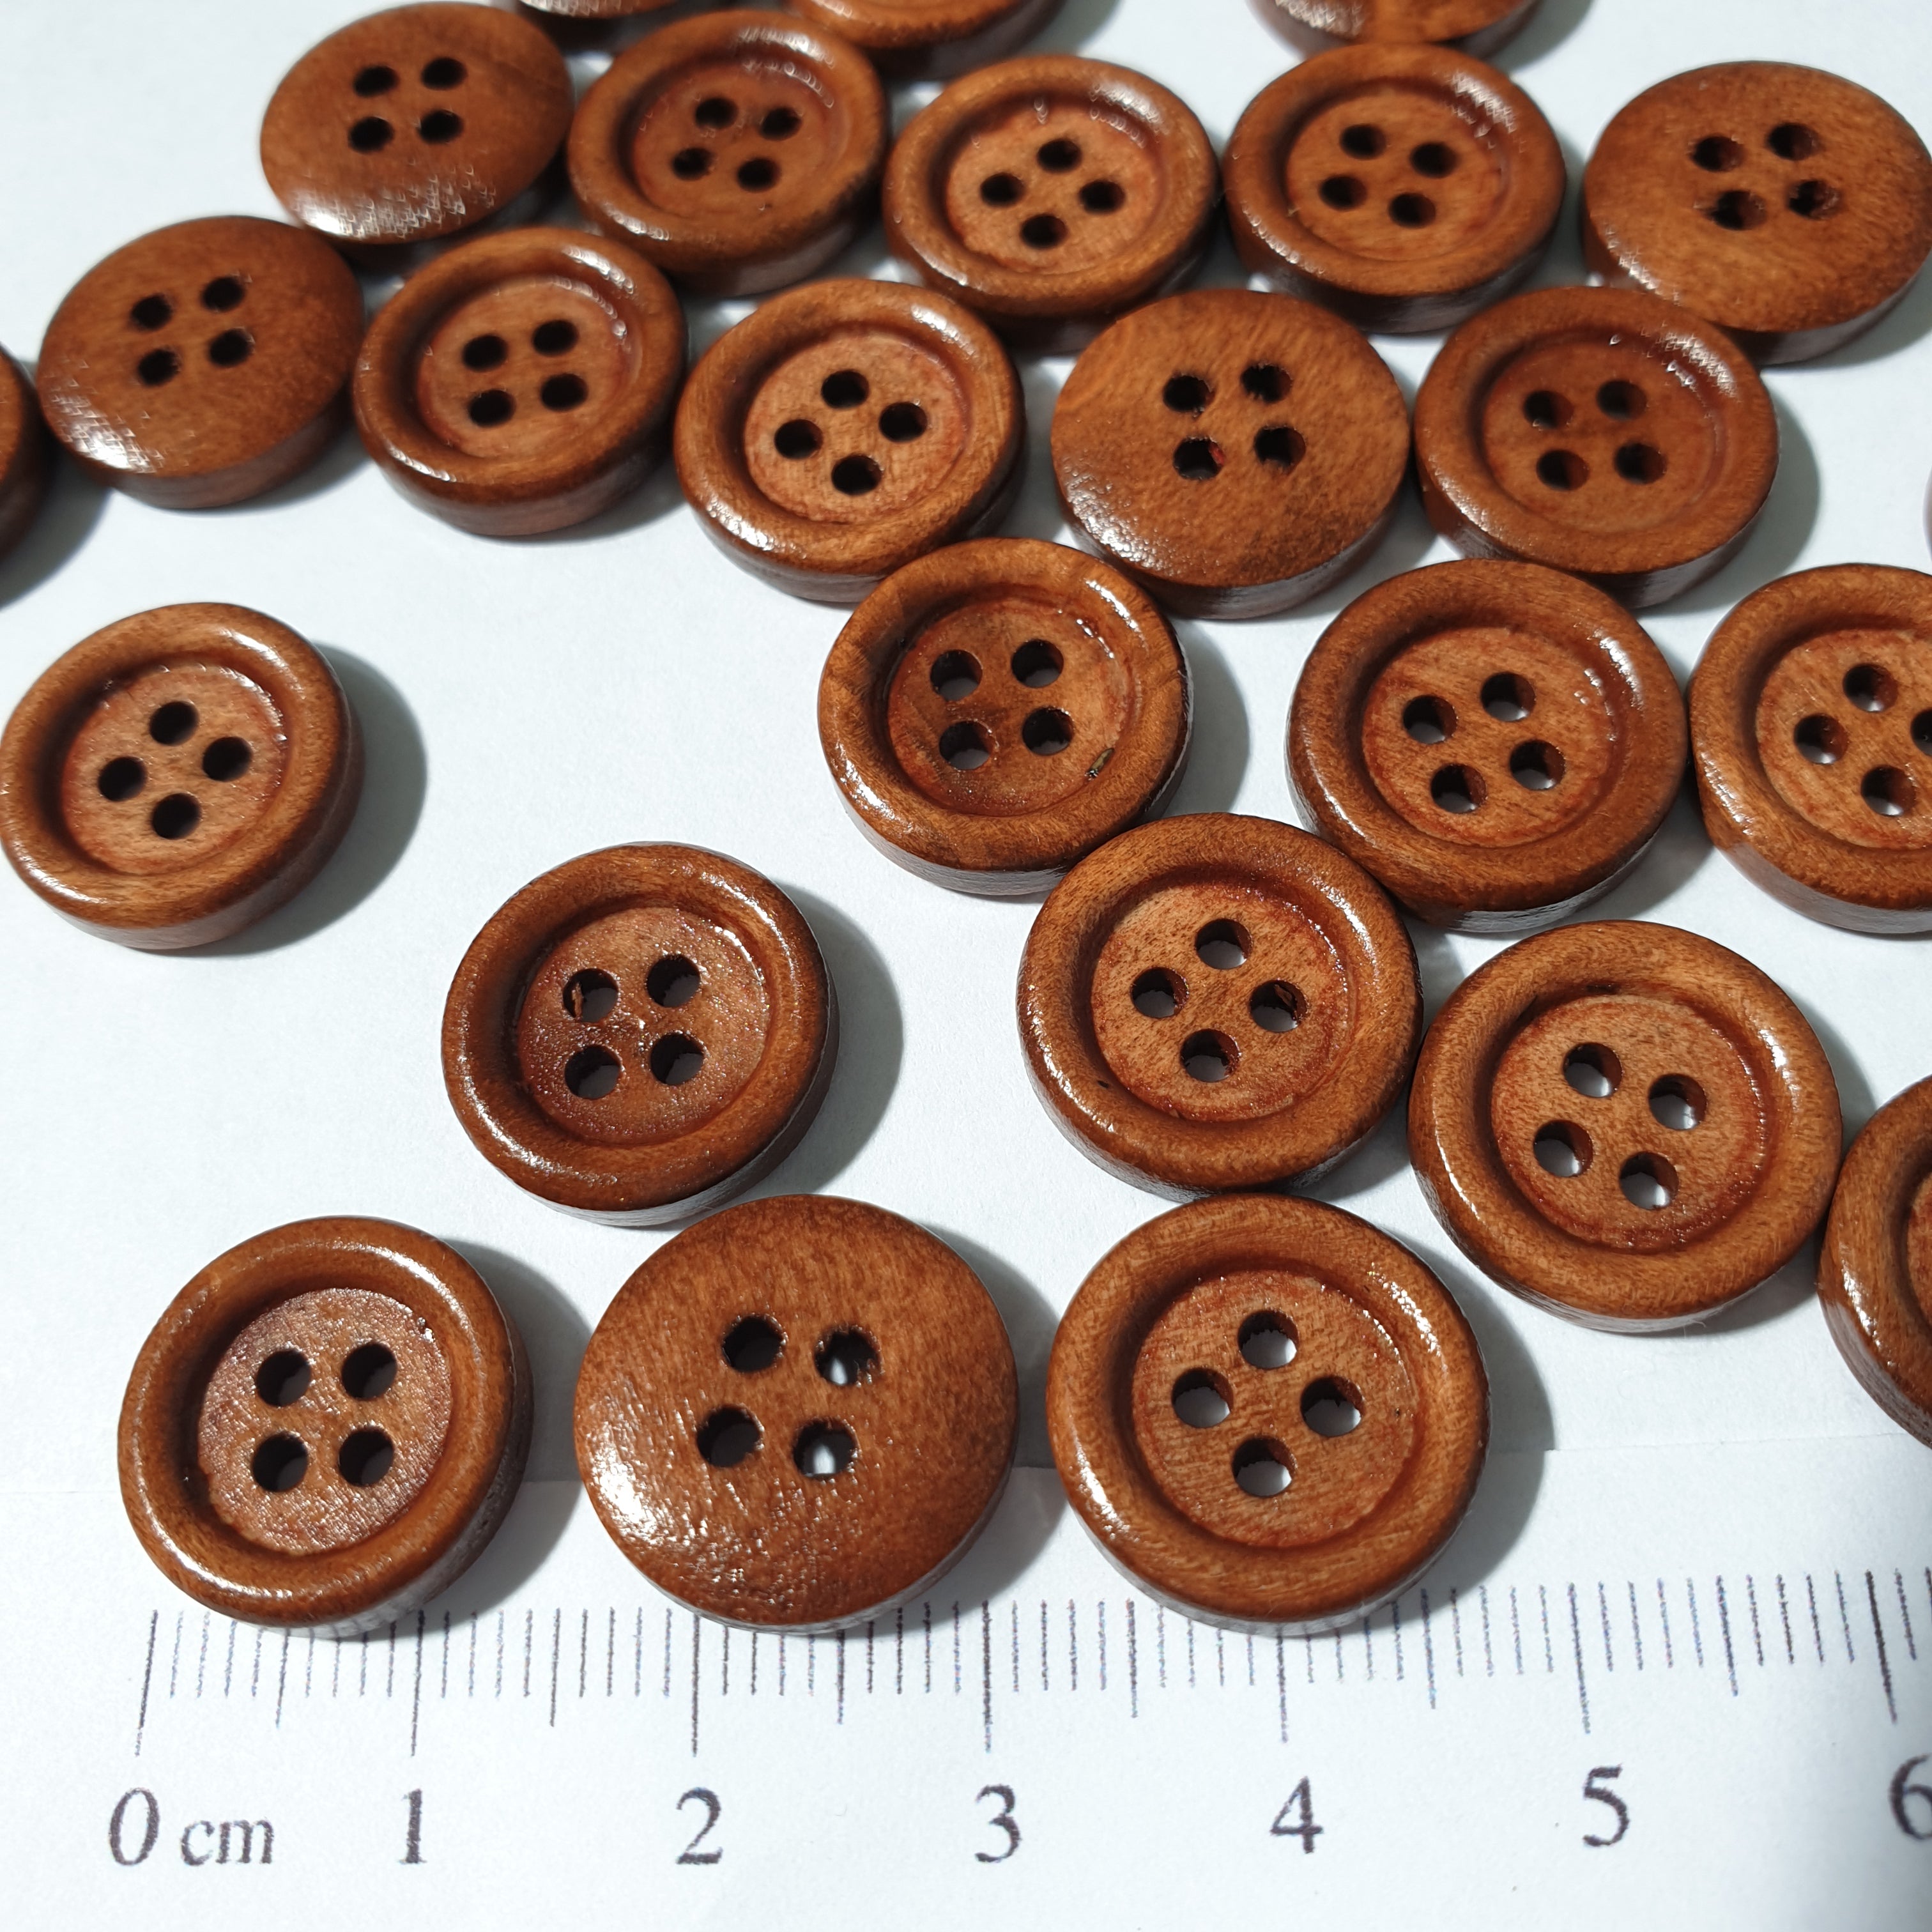 MajorCrafts 44pcs 15mm Walnut Brown Round 4 Holes Wooden Sewing Buttons